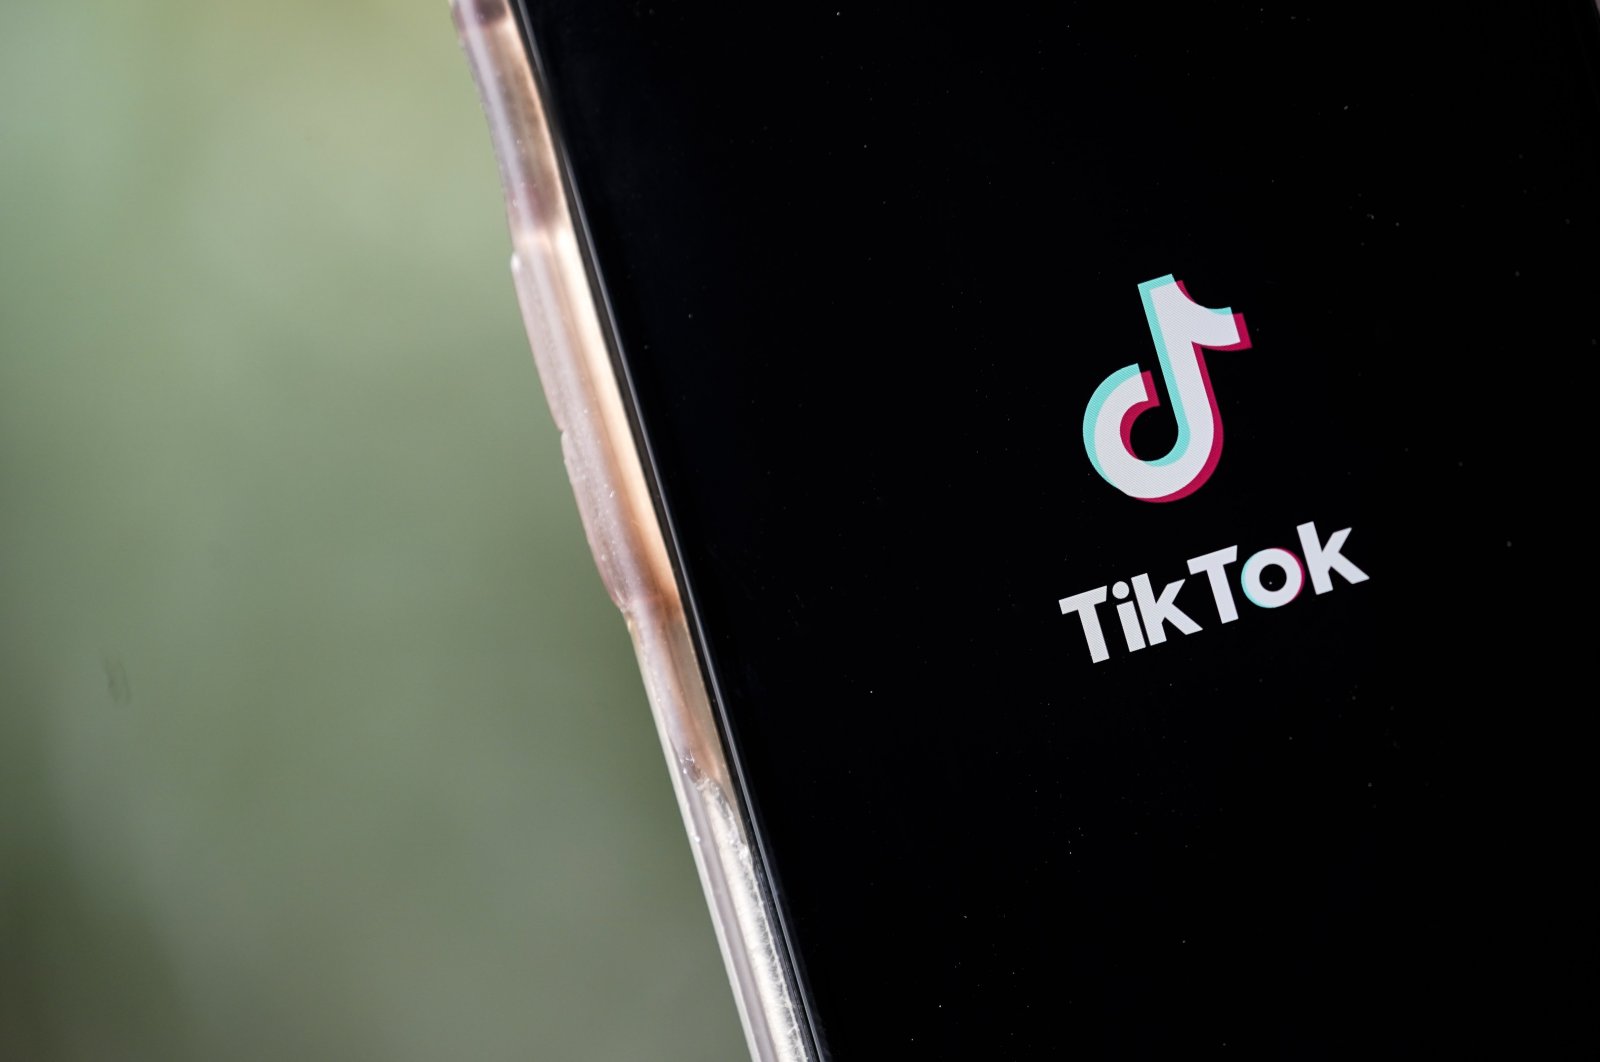 The TikTok app is displayed on a screen of a phone in this file photo taken Aug. 7, 2020. (AFP Photo)